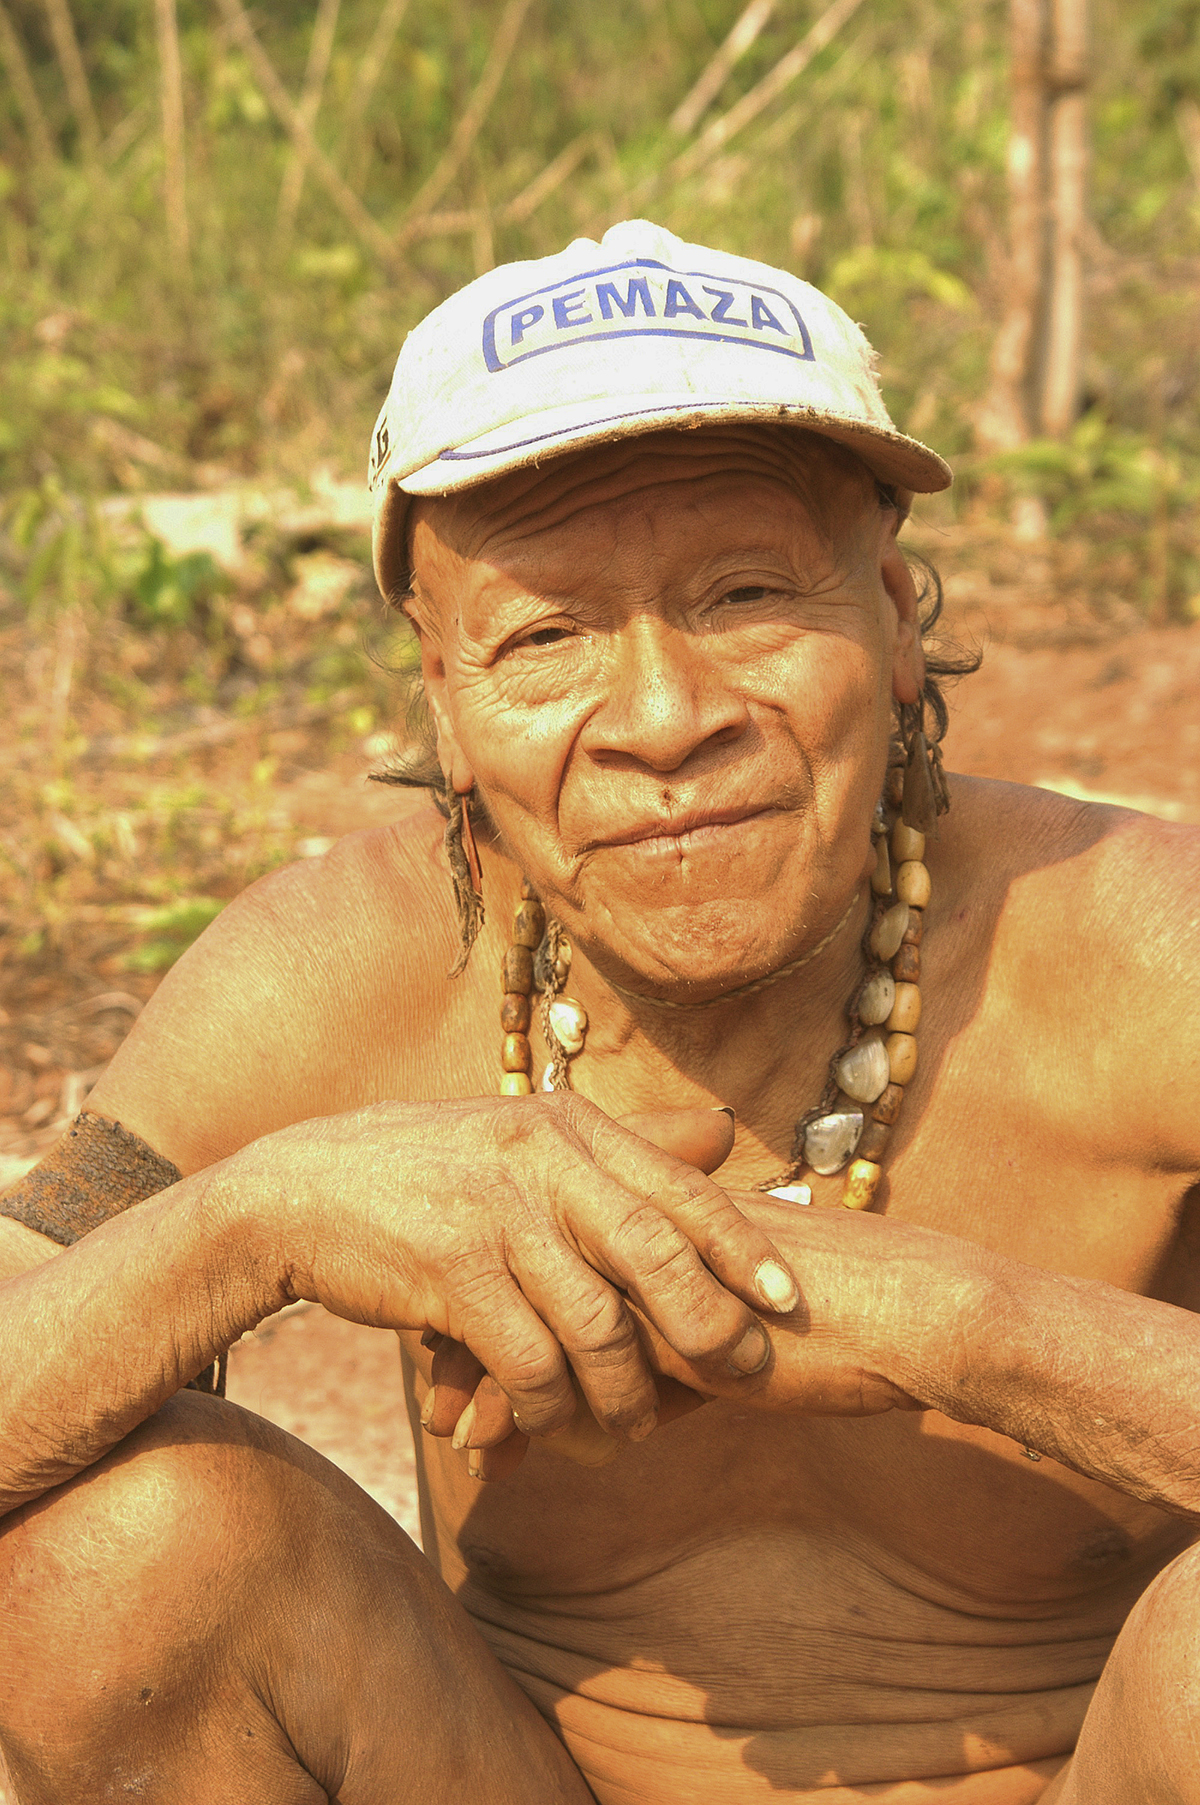 The Few Remaining: Genocide Survivors and the Brazilian State